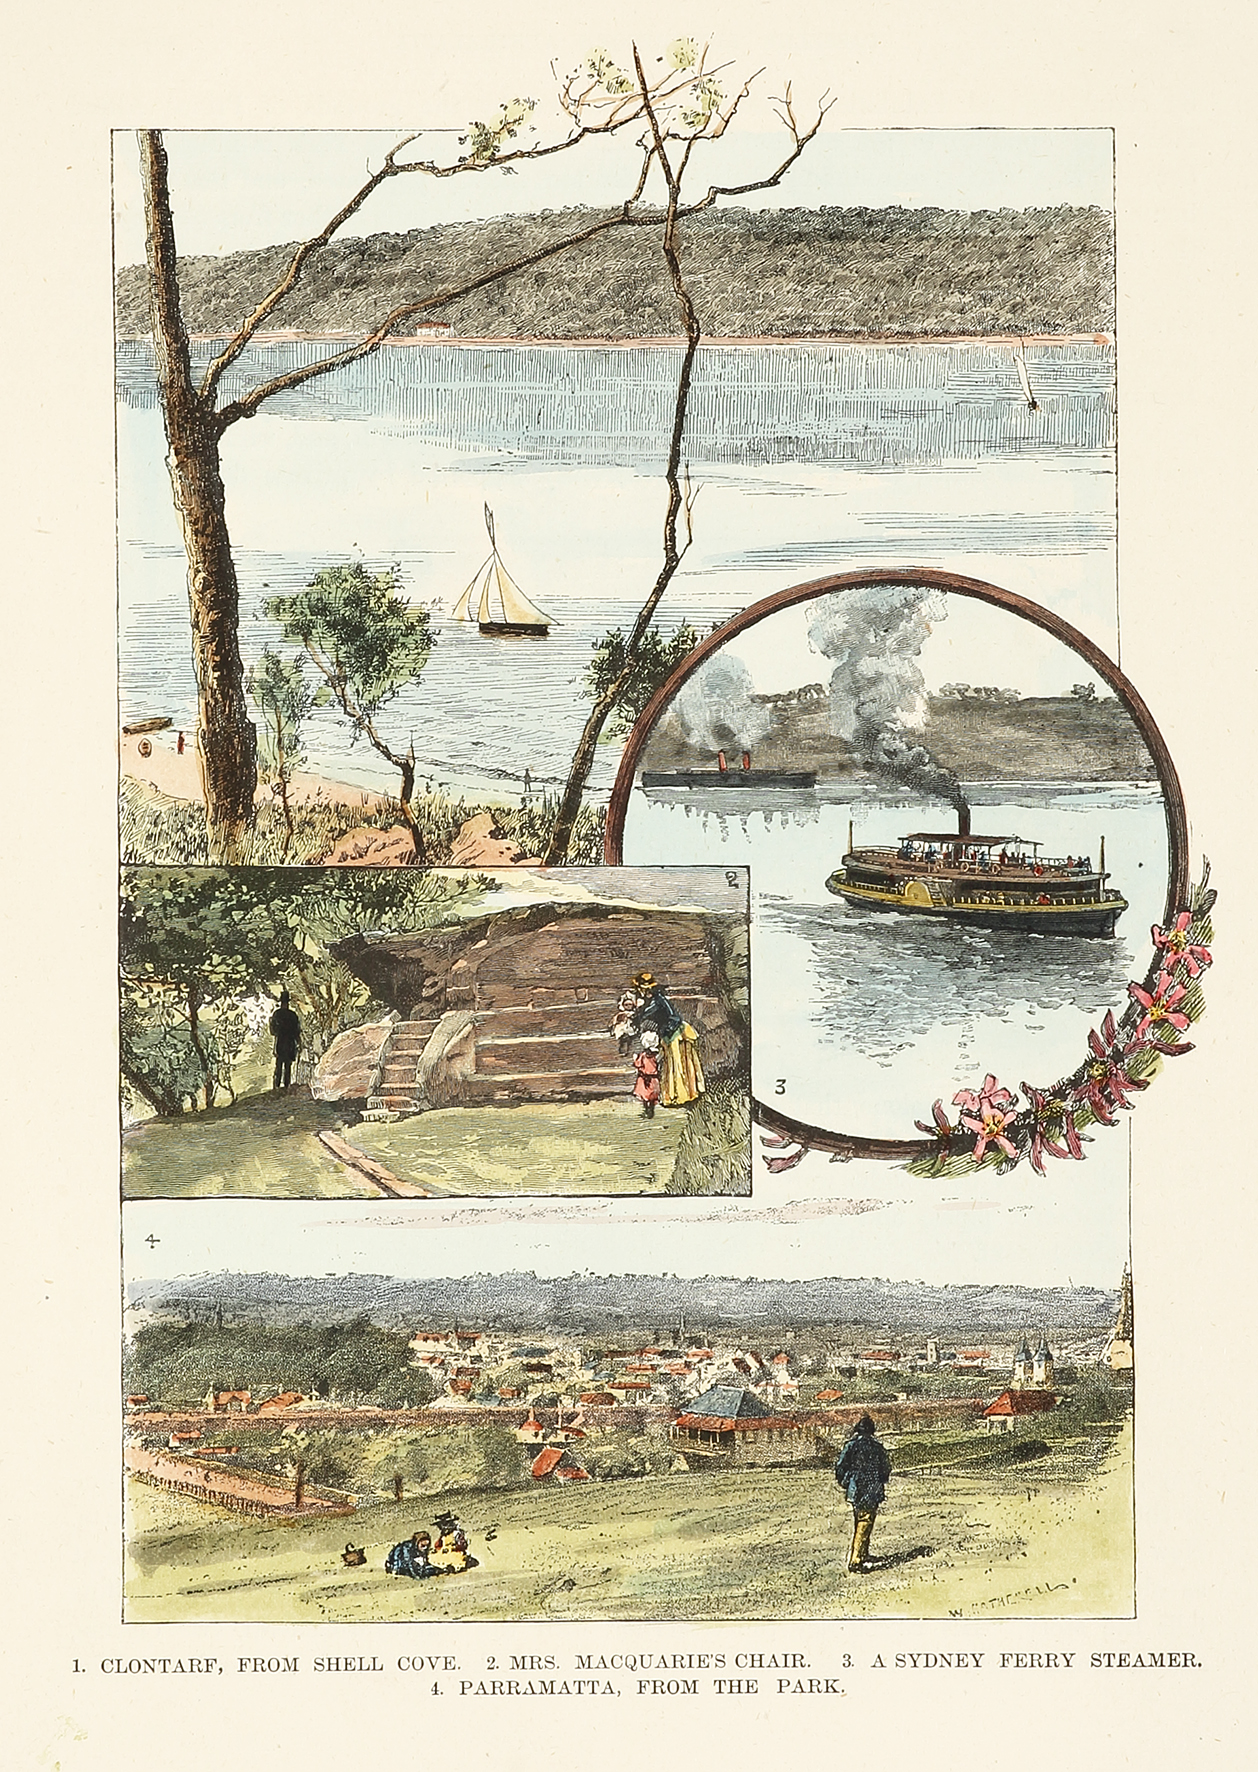 Clontarf, from Shell Cove. Mrs Macquarie's Chair. A Sydney Ferry Steamer. Parramatta, from the Park. - Antique Print from 1887